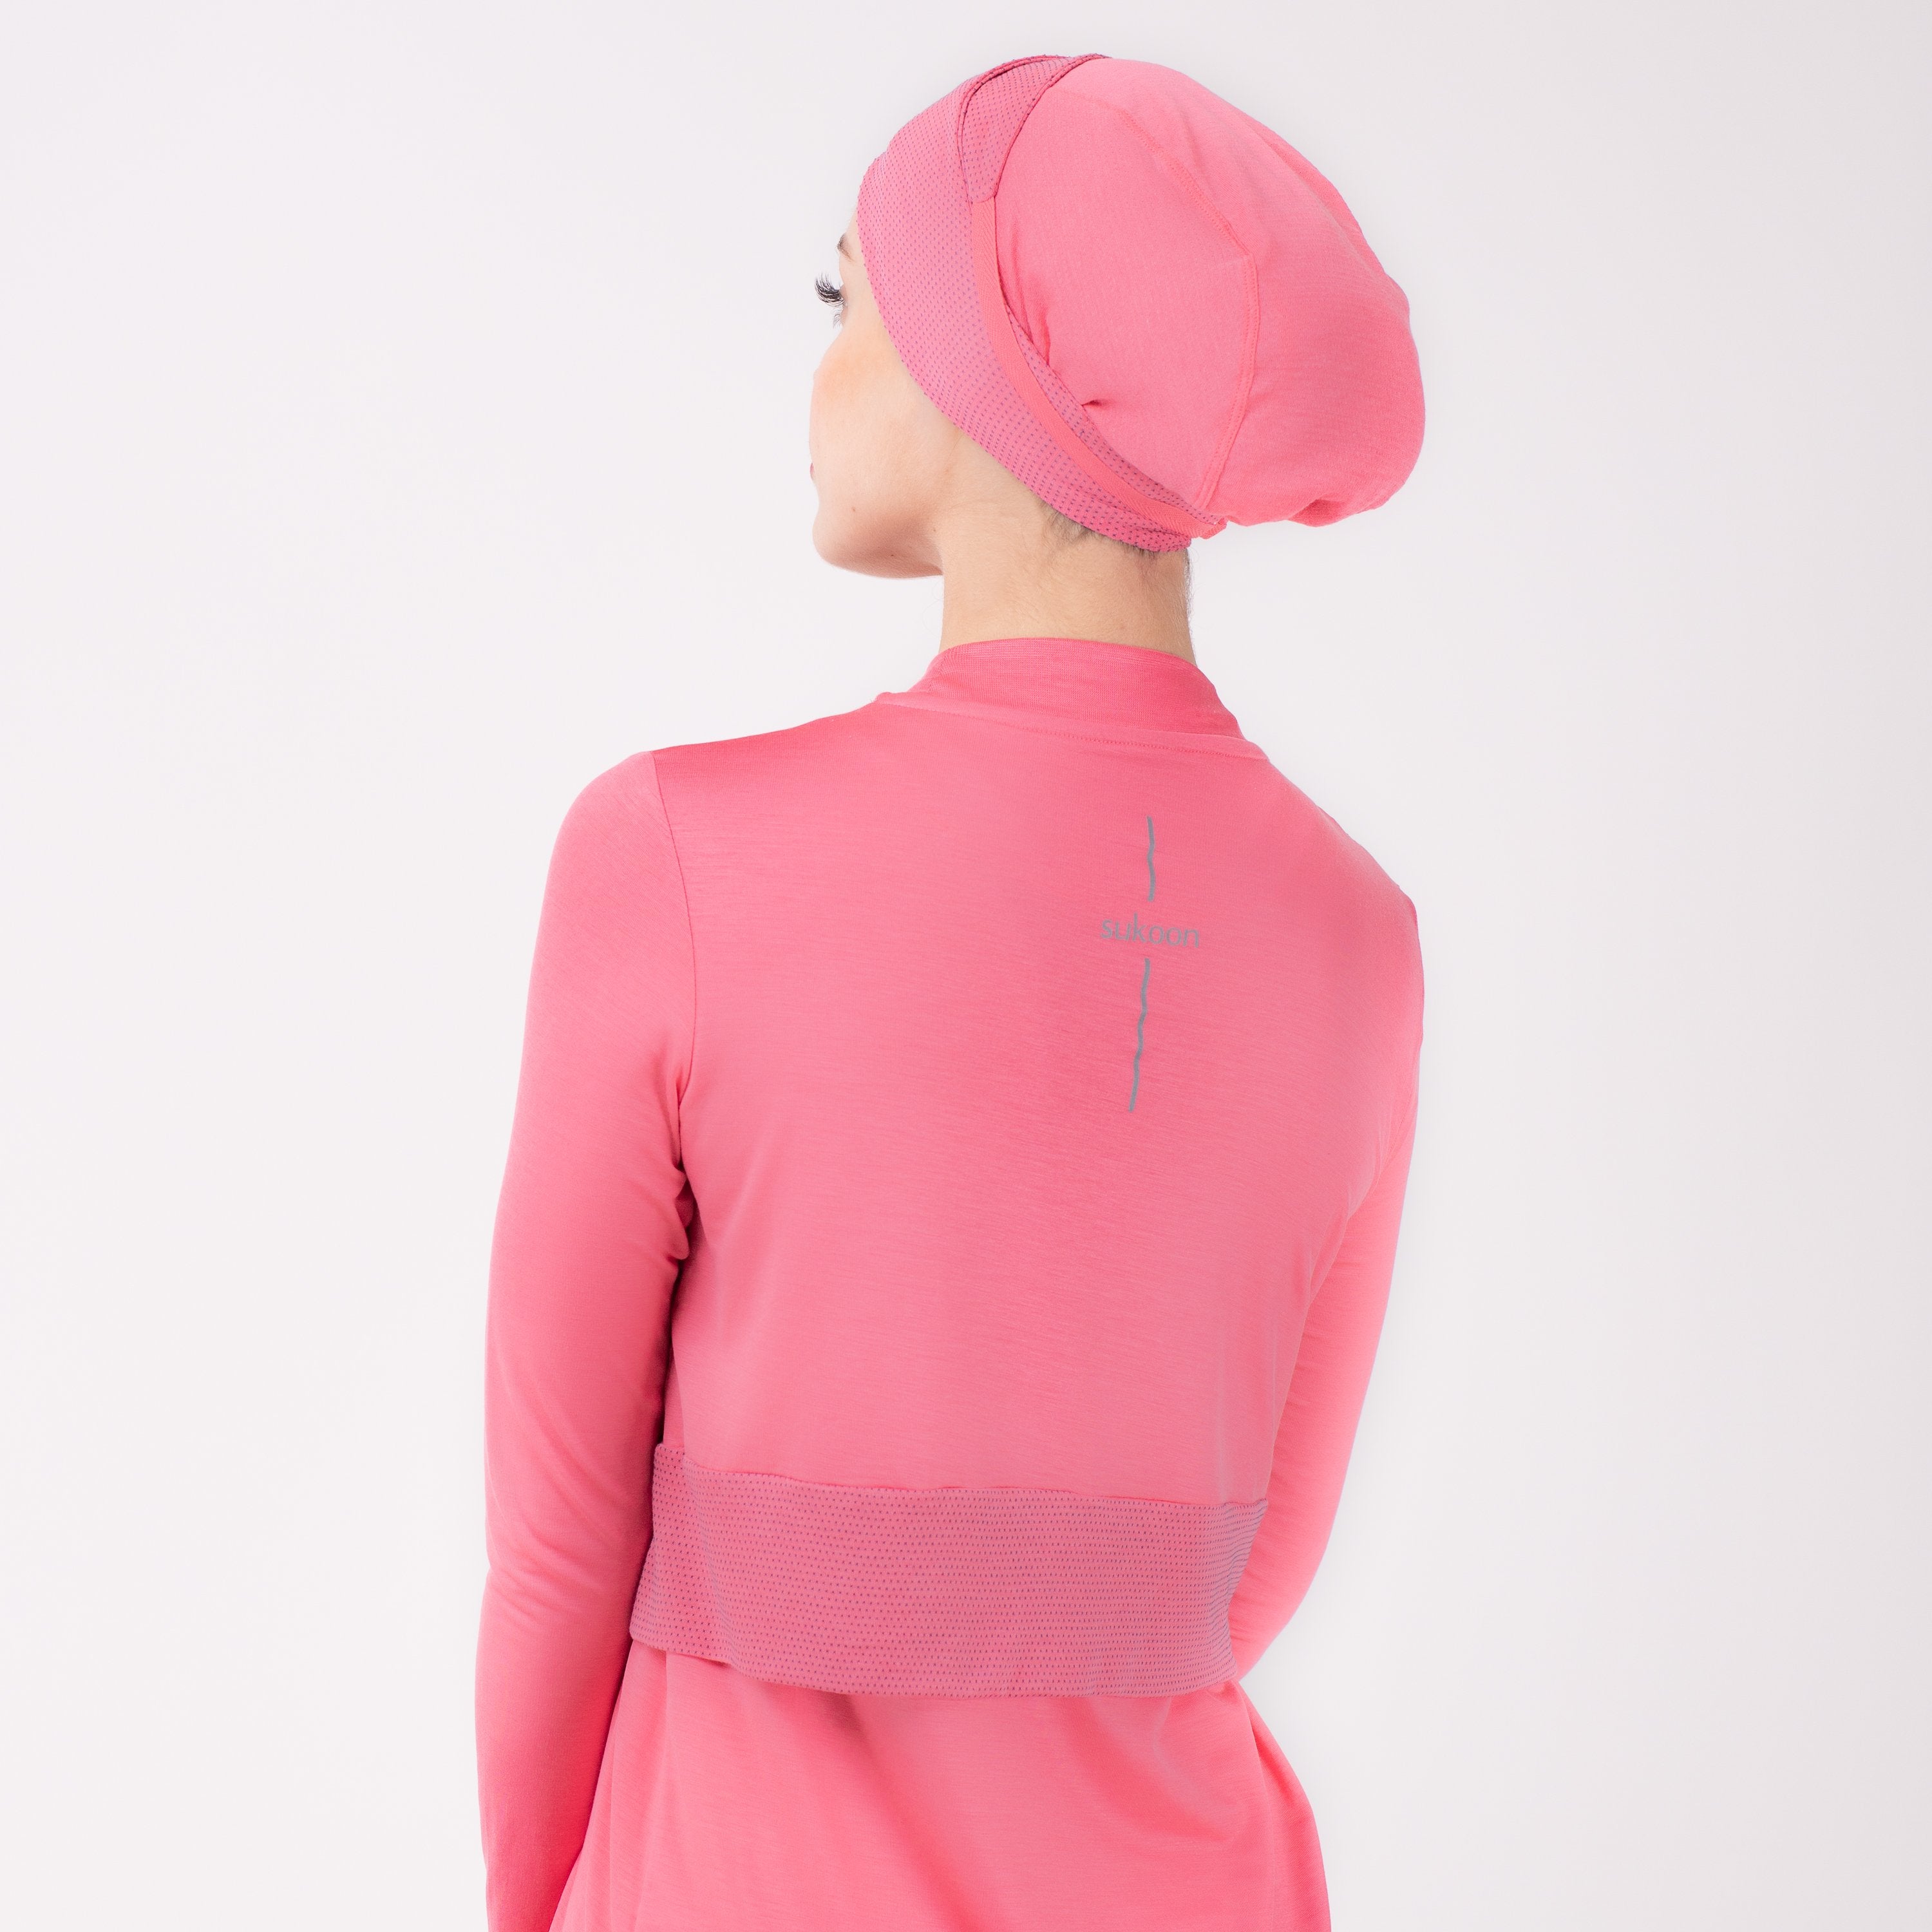 Back detail of woman in pink shirt with matching pink HAWA headwrap.